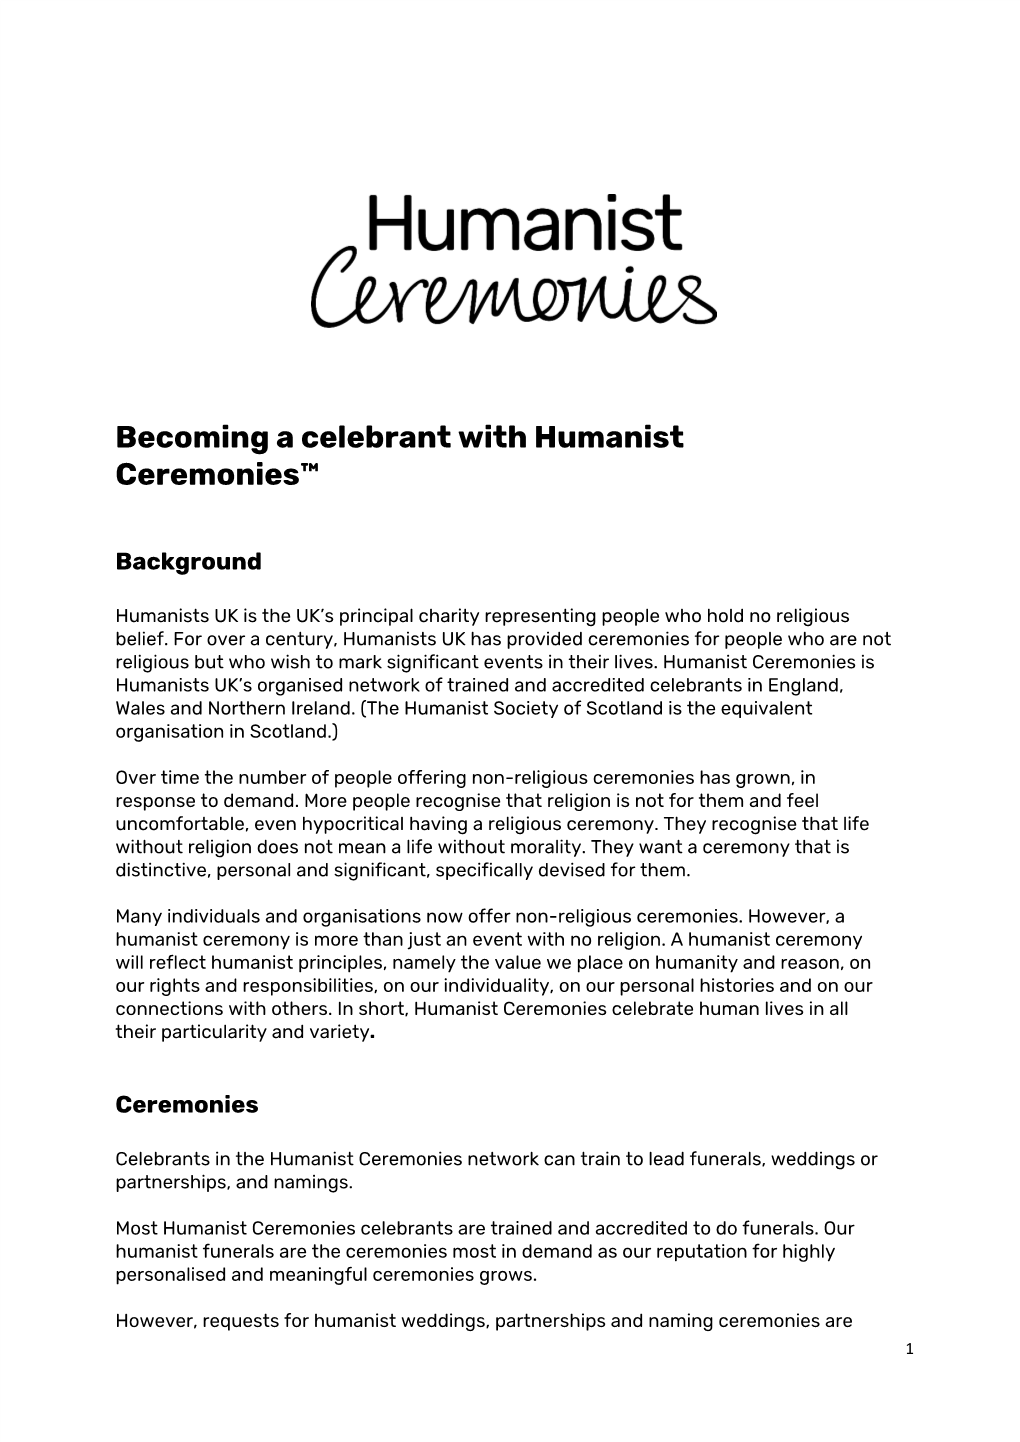 Becoming a Celebrant with Humanist Ceremonies™